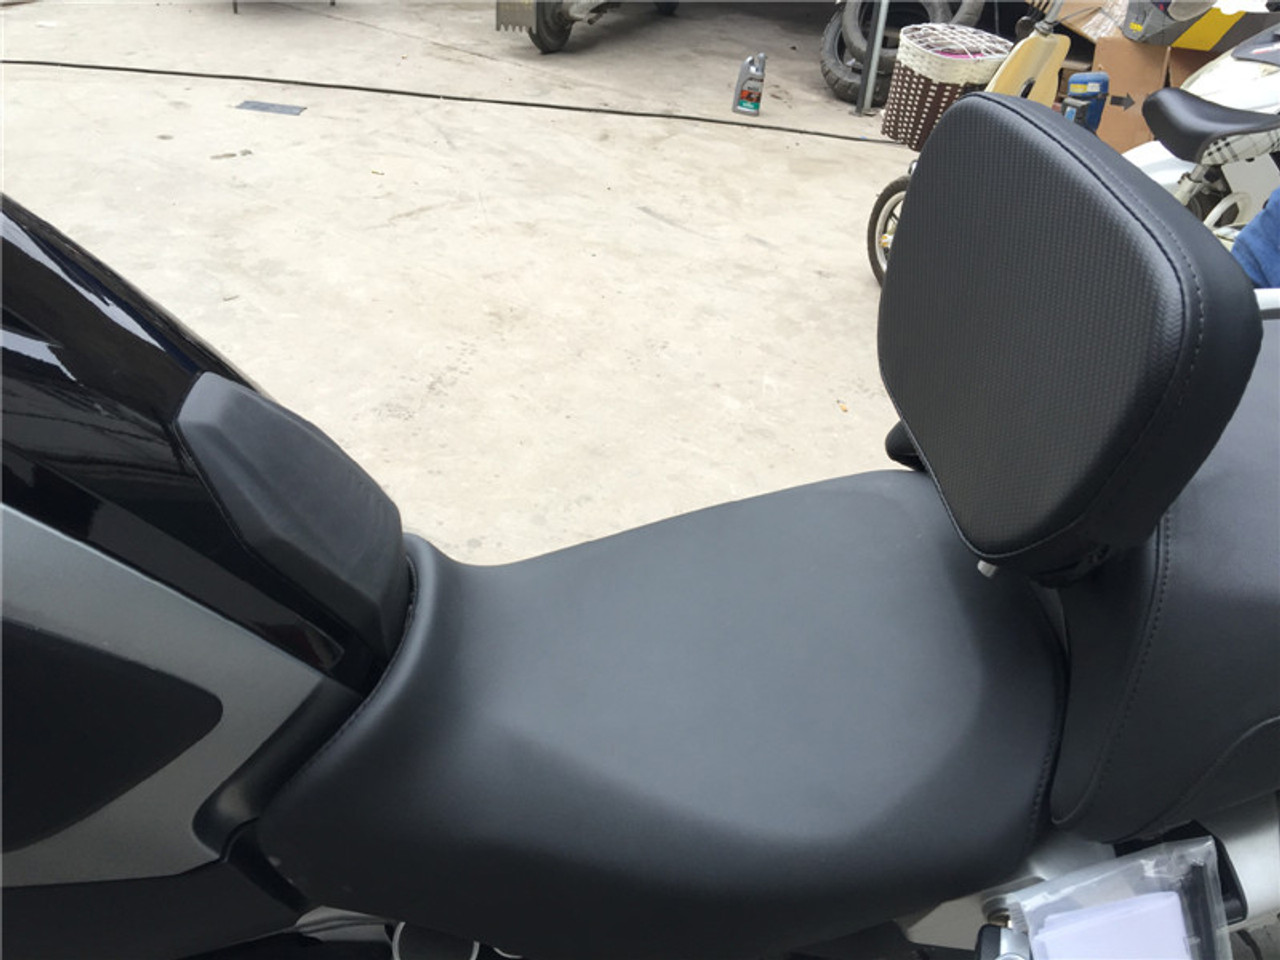 Front Driver Seat Rider Backrest Pad Fit for BMW R1200GS 2013-2019 Black